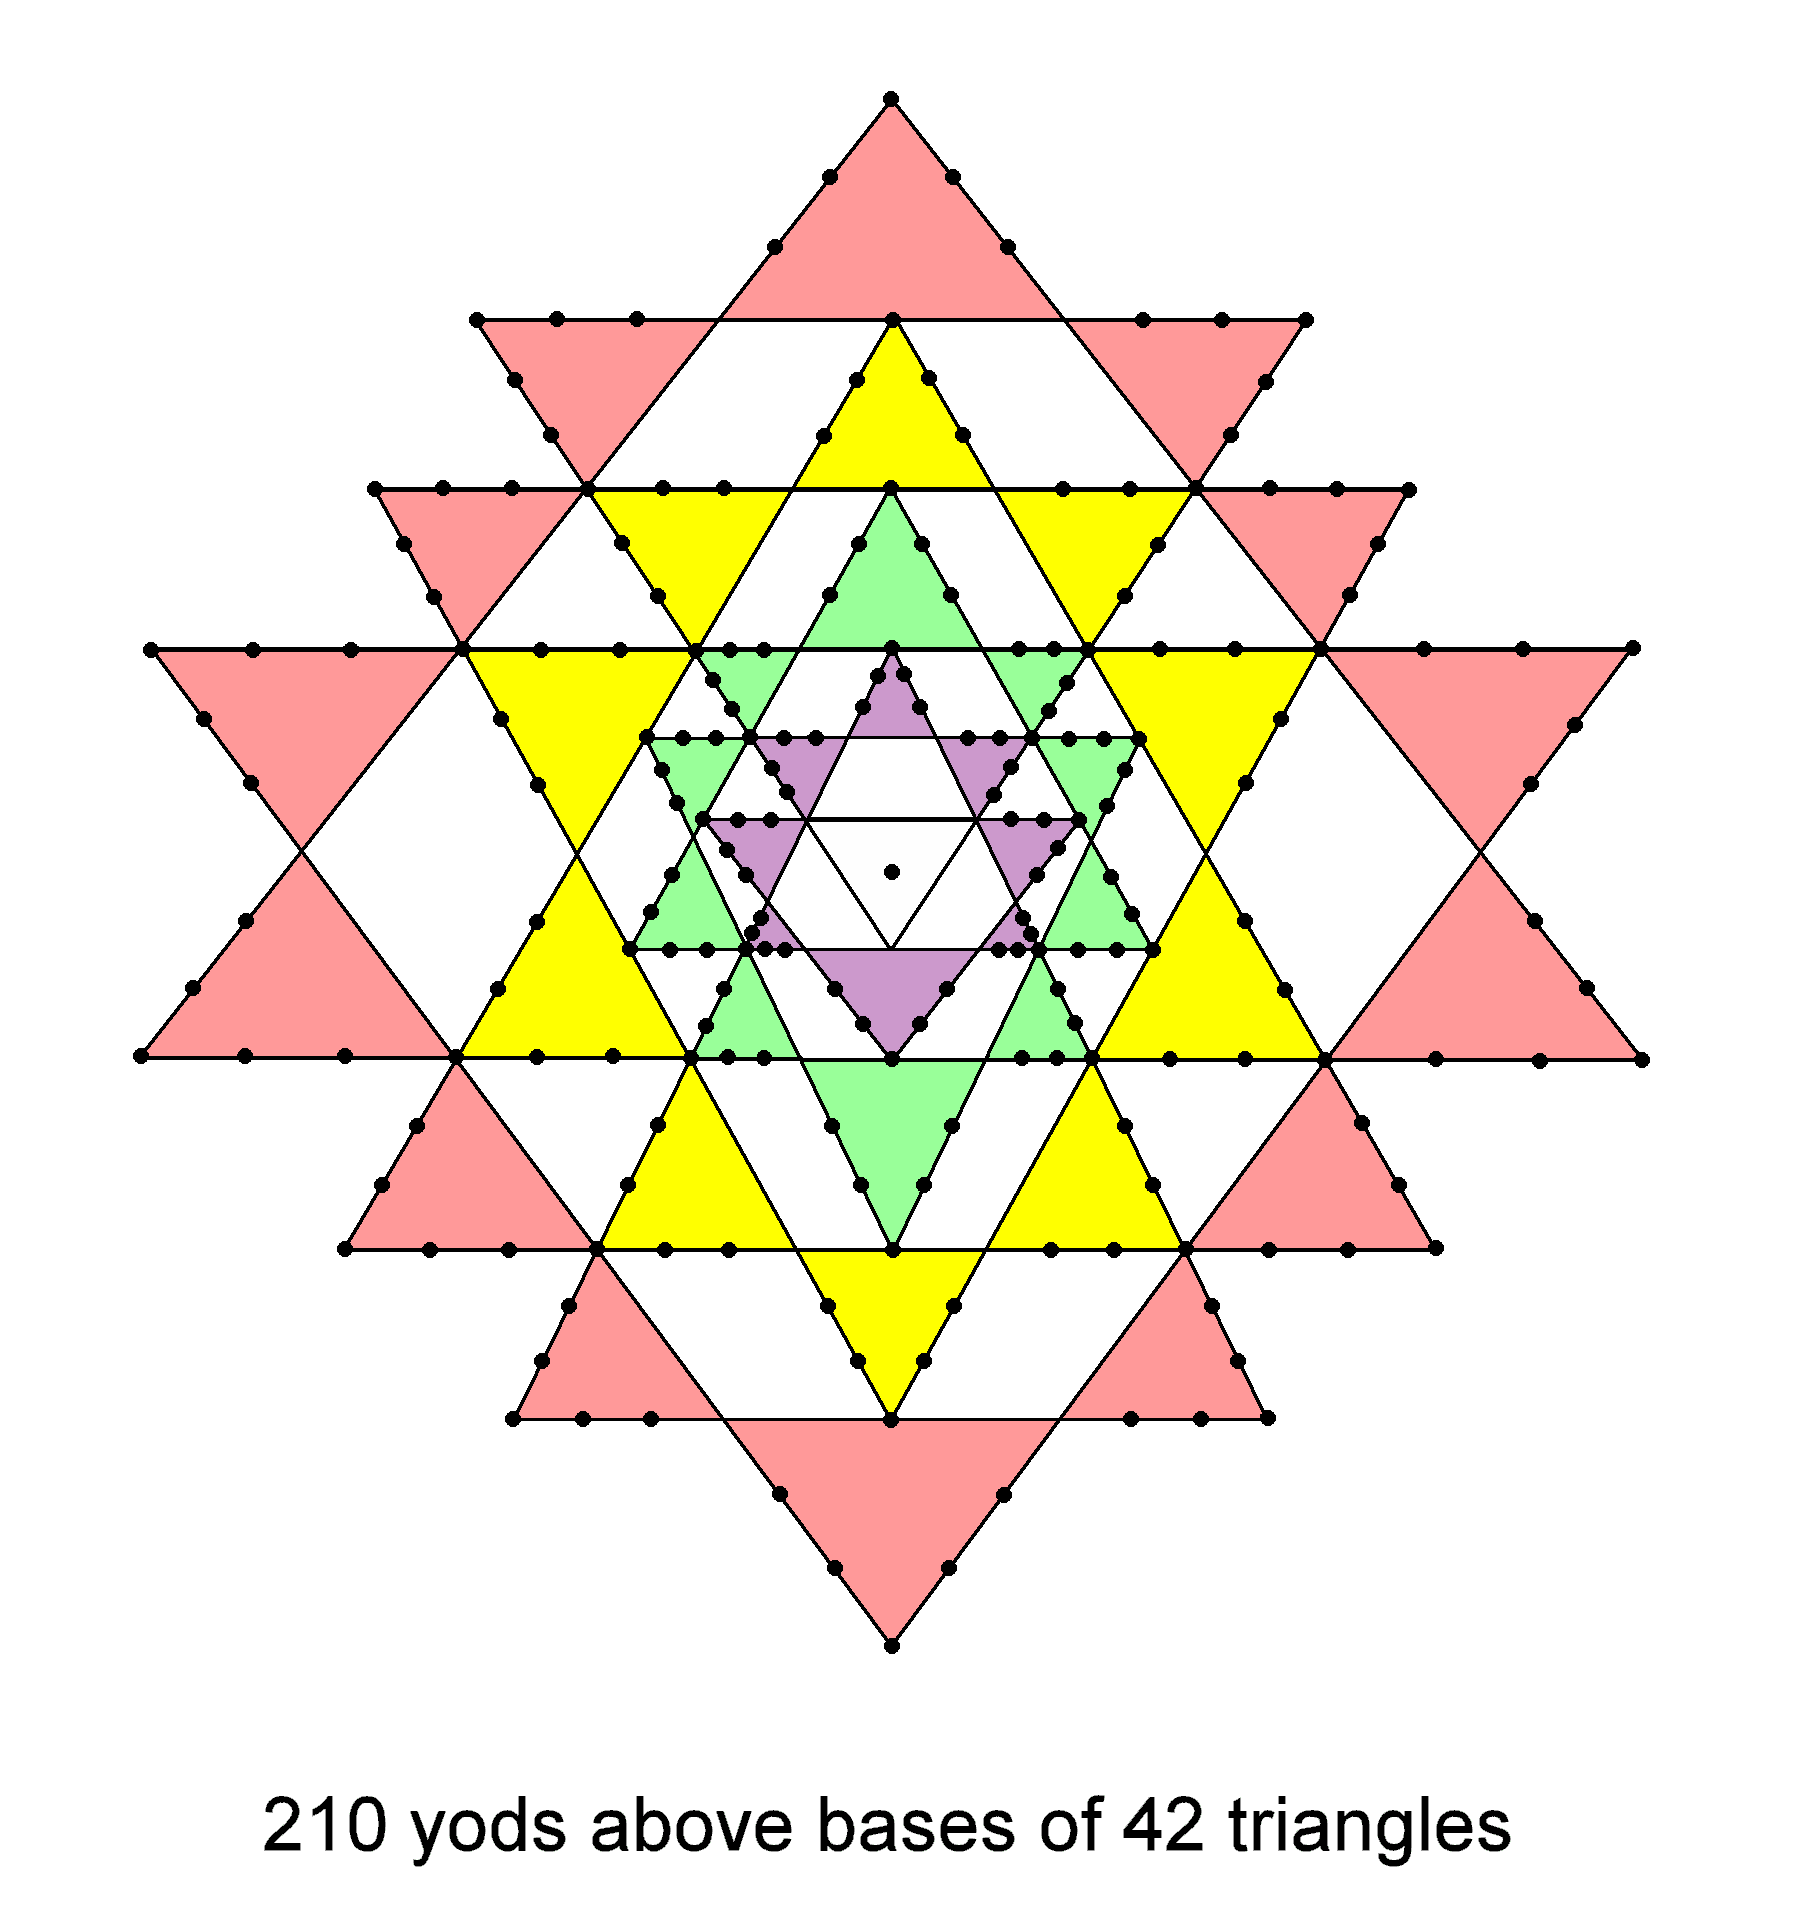 210 yods on sides of triangles in Sri Yantra